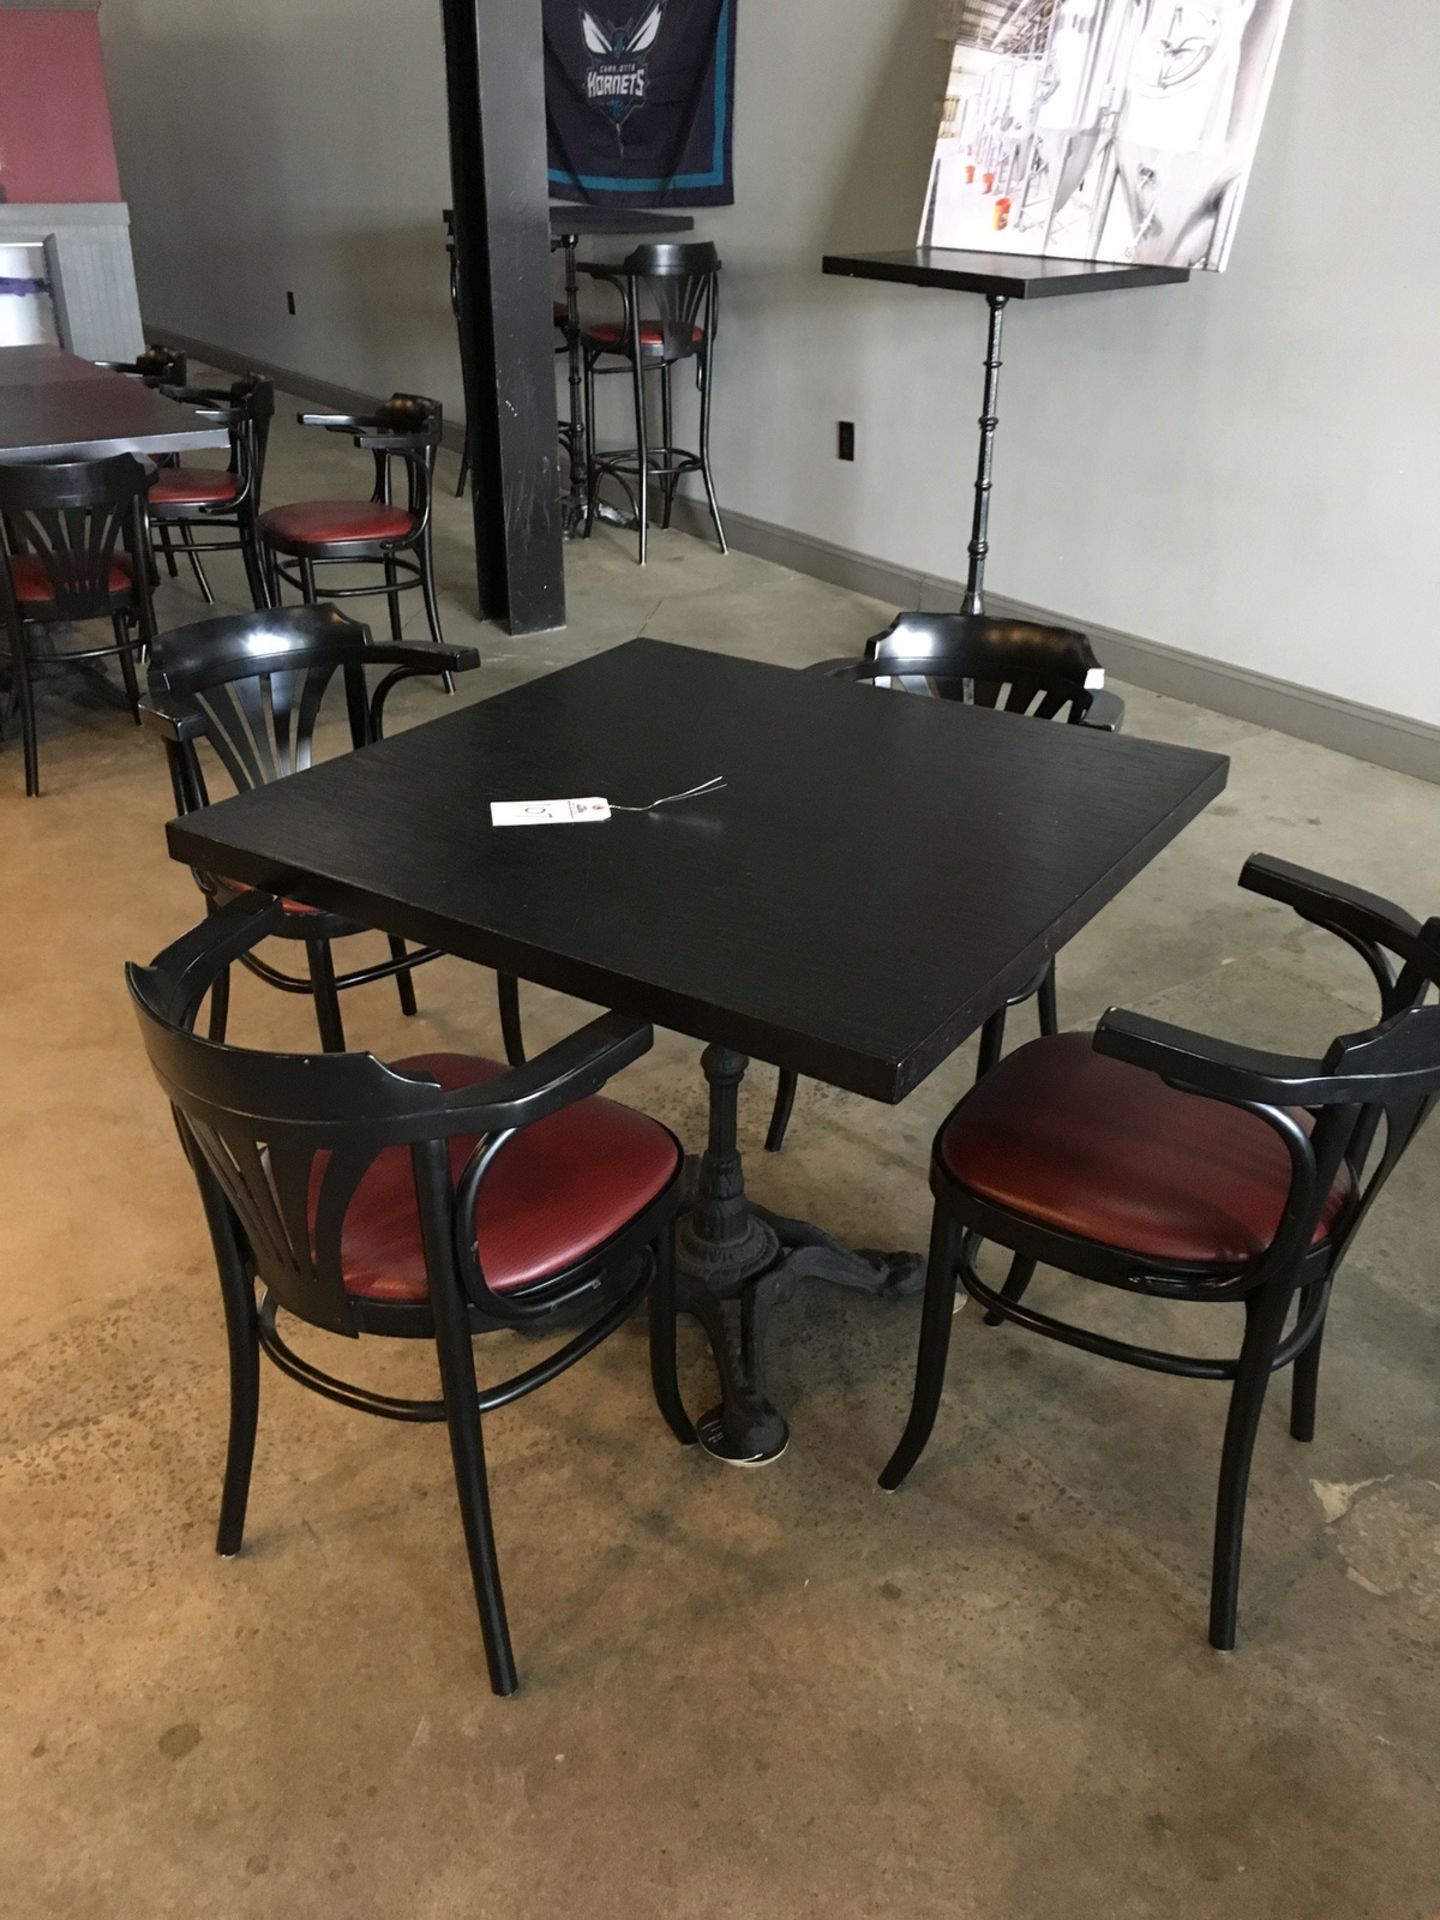 Lot of 25 Chairs, (7) Tables | Rig Fee: Hand Carry or Contact Rigger